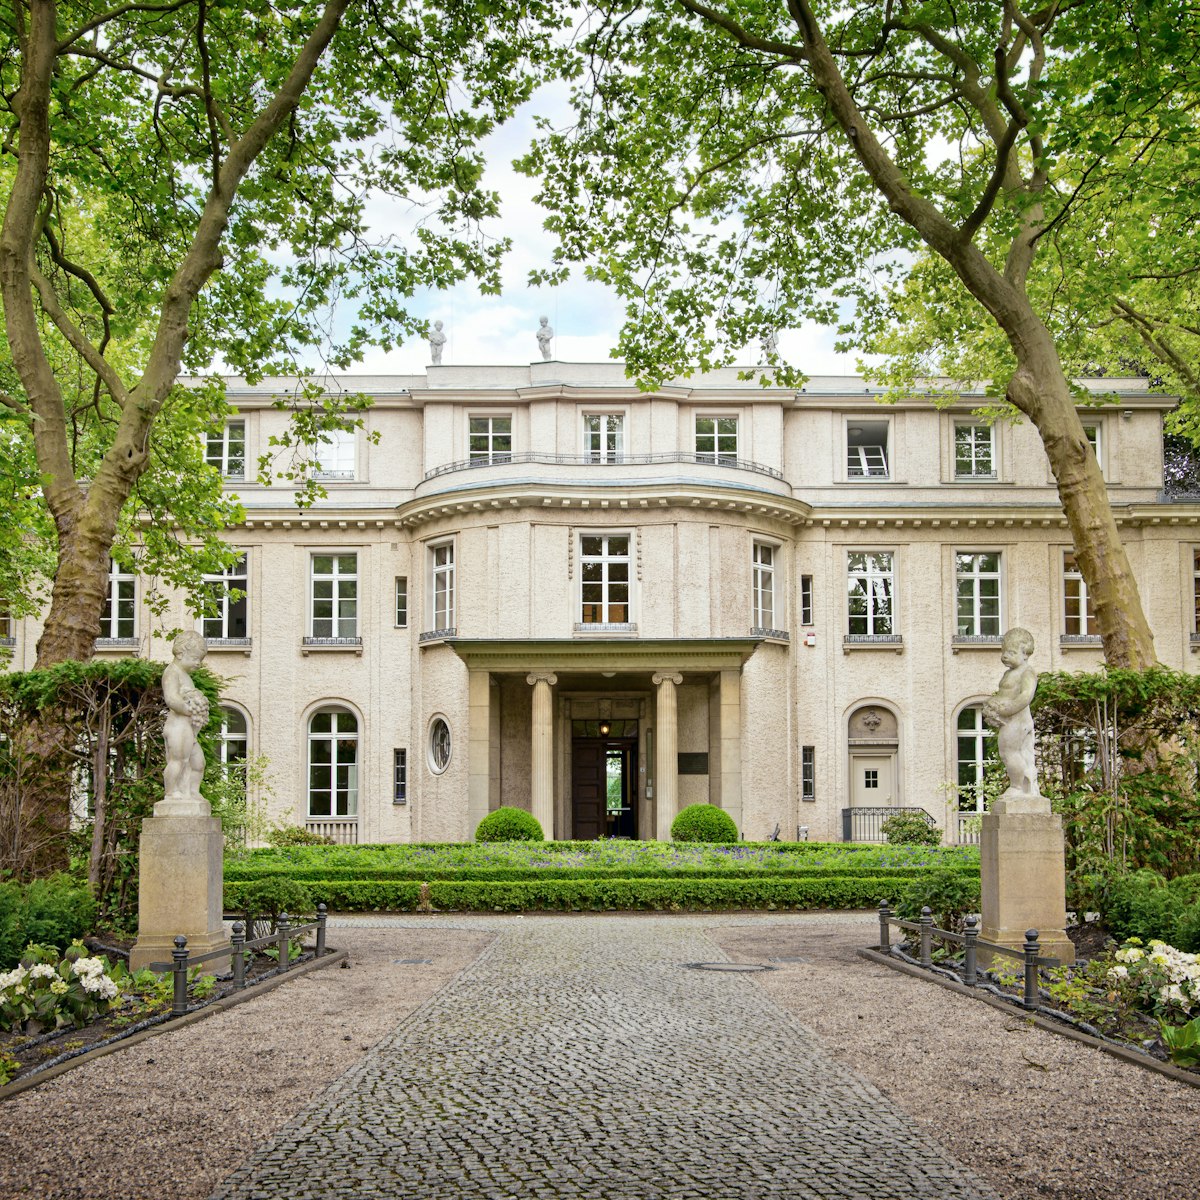 House of the Wannsee conference in Berlin, Germany ; Shutterstock ID 292127756; Your name (First / Last): Josh Vogel; Project no. or GL code: 56530; Network activity no. or Cost Centre: Online-Design; Product or Project: 65050/7529/Josh Vogel/LP.com Destination Galleries